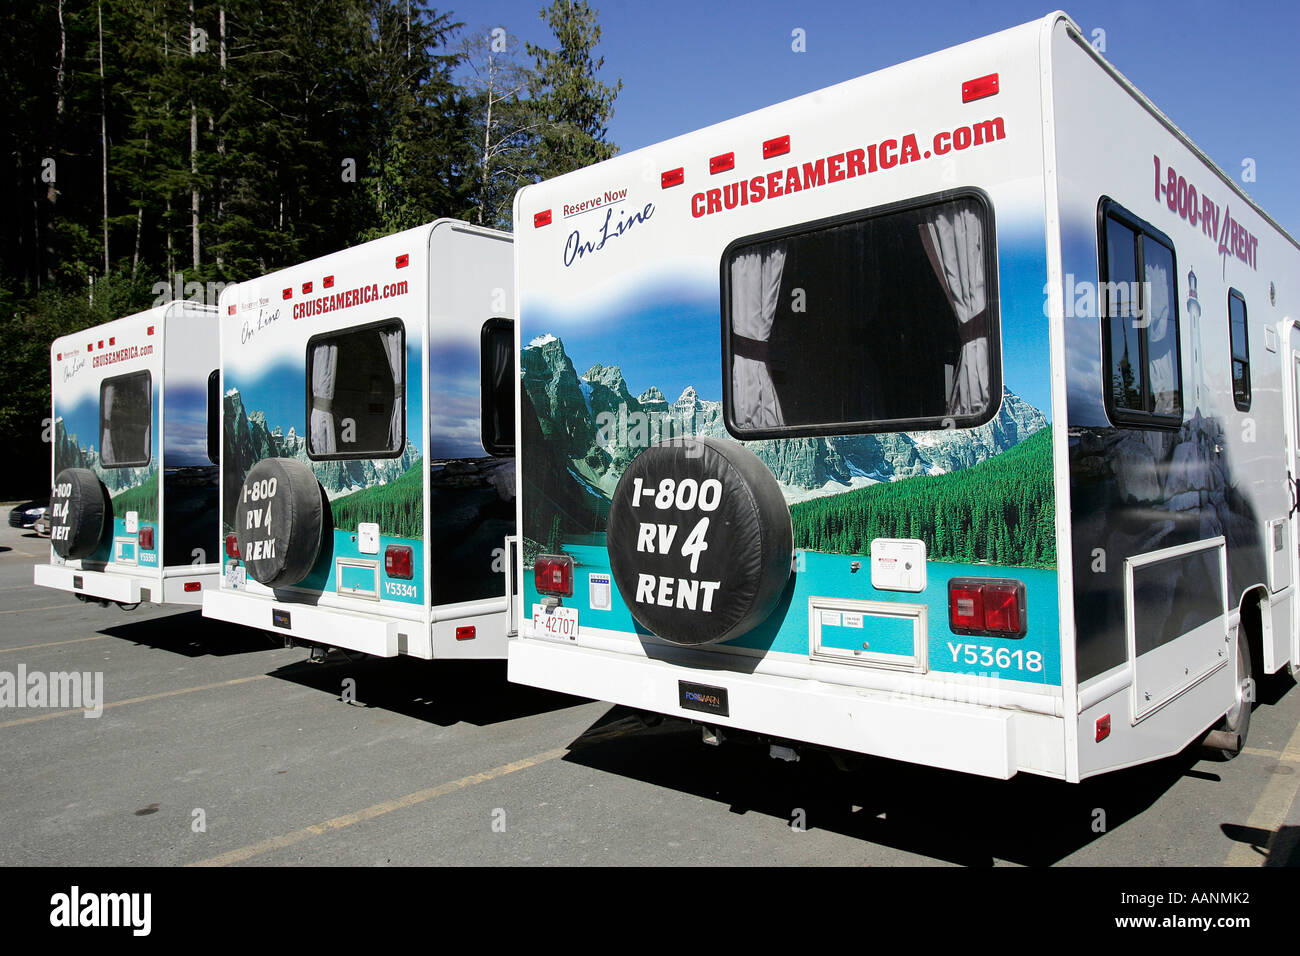 Motor homes to rent in British Columbia, Canada Stock Photo